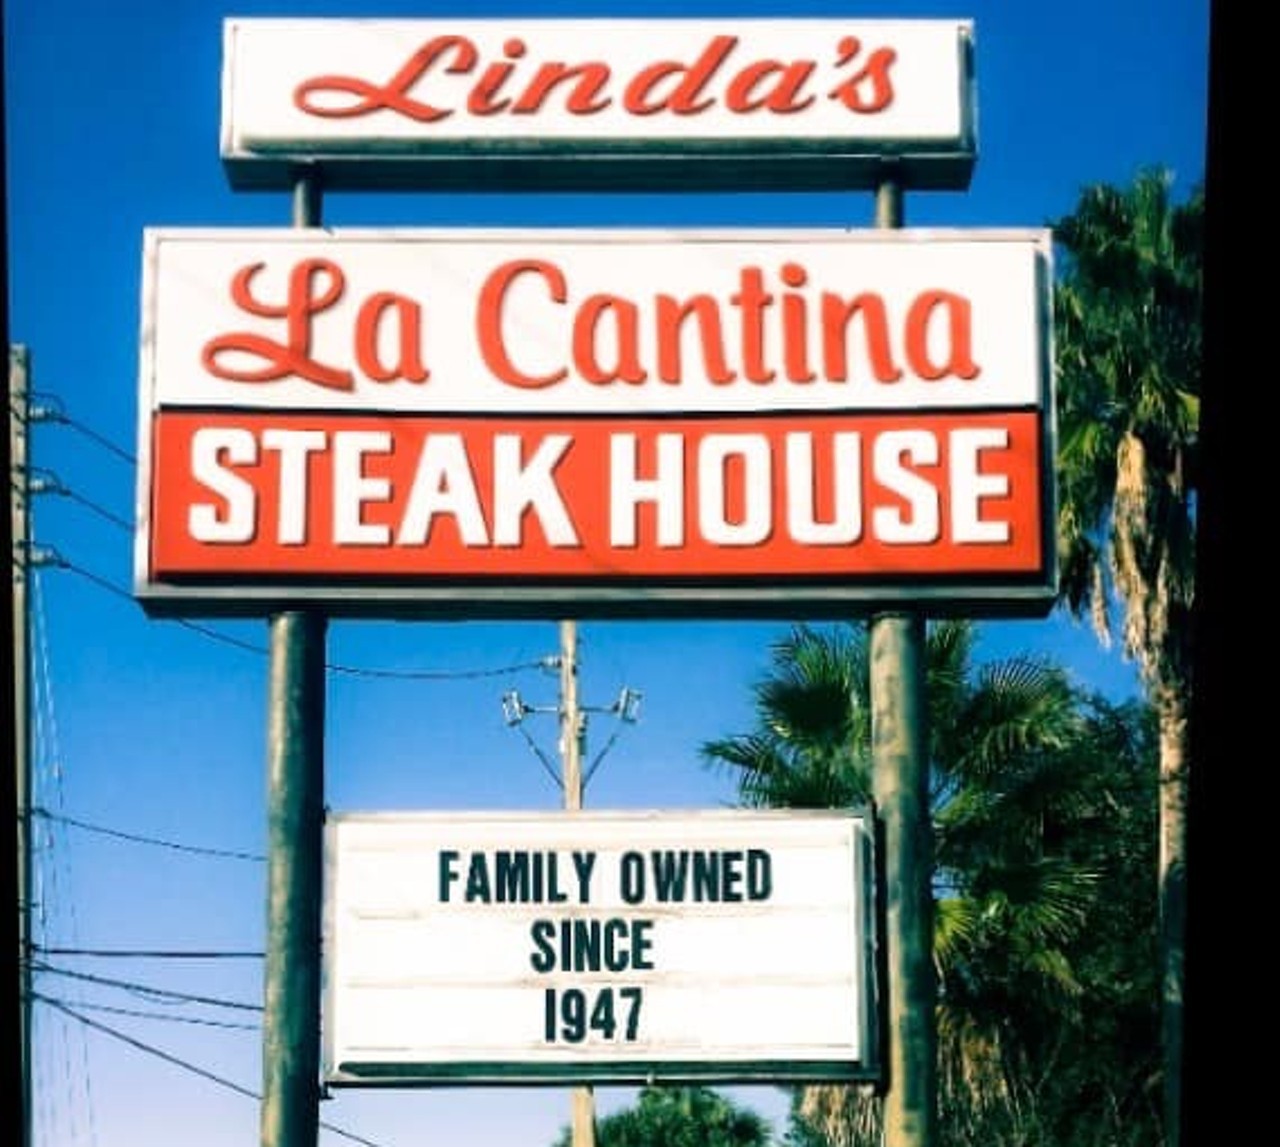 Linda's La Cantina
4721 E. Colonial Drive, Orlando
This award-winning old-school eatery has been serving steaks since 1947. Decked out in classic checkered tablecloths and complete with a lounge, Linda's La Cantina serves as an Orlando staple perched on East Colonial Drive.